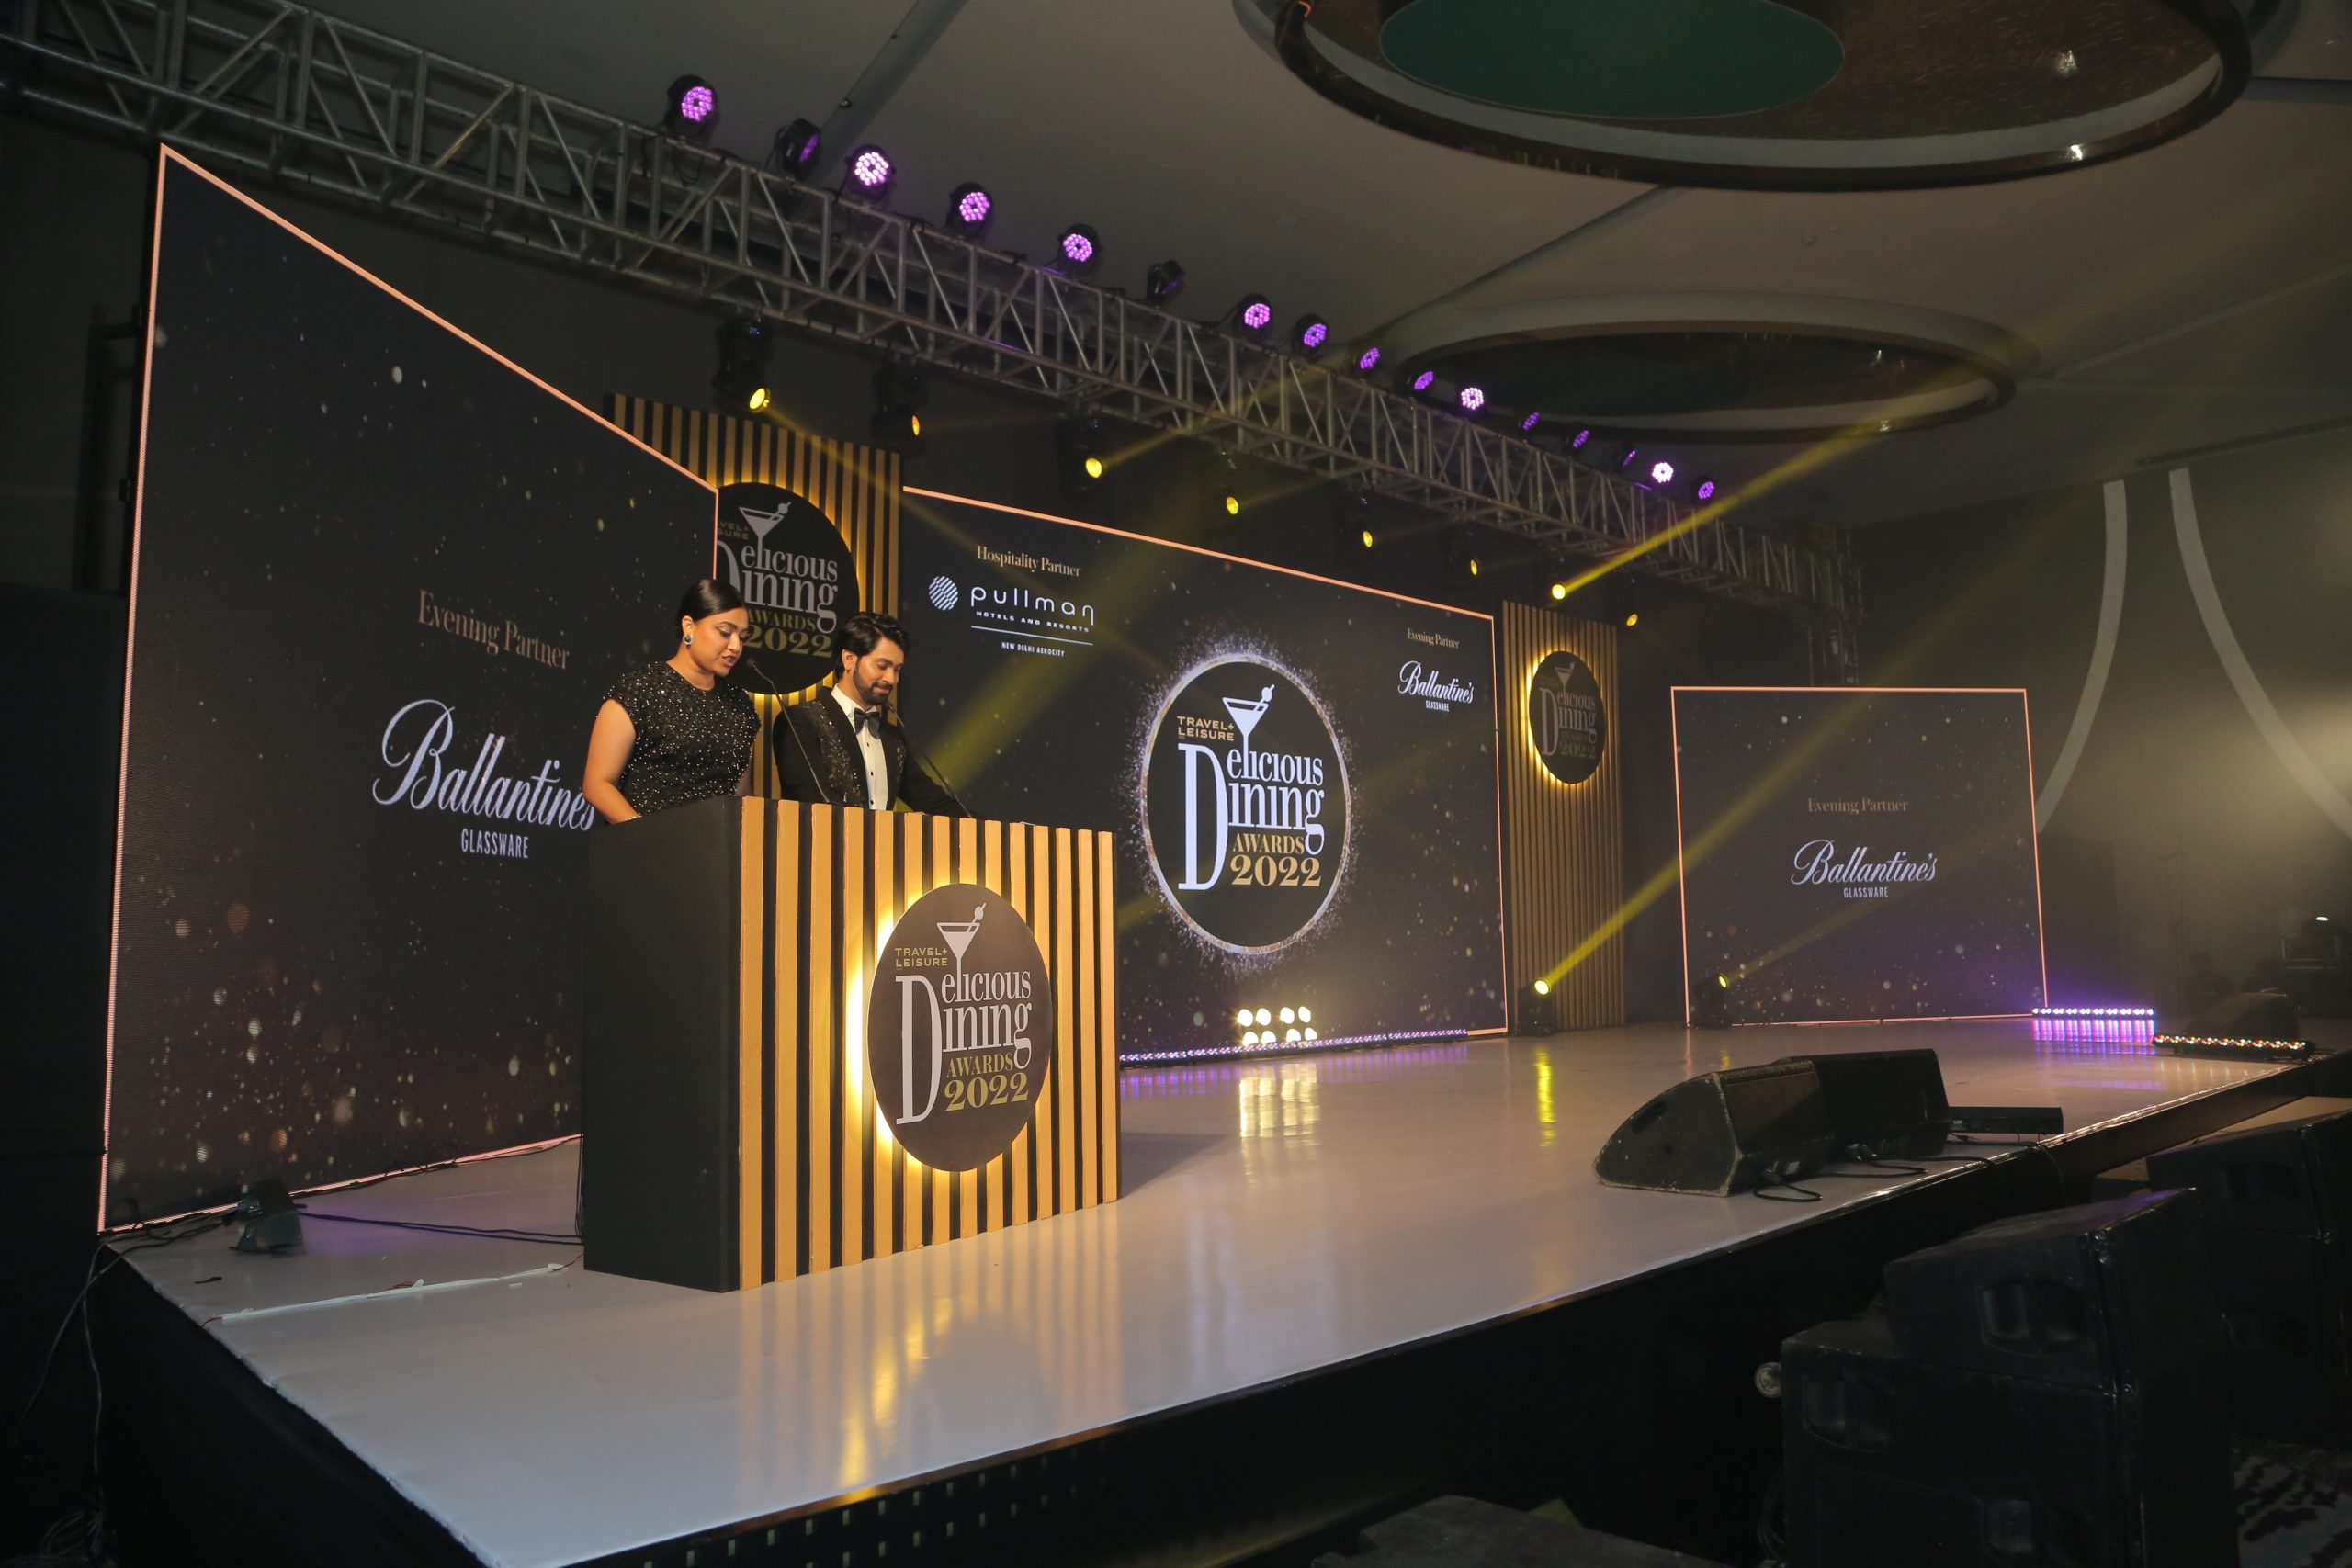 Travel + Leisure India & South Asia Celebrates Delicious Dining Awards 2022 Winners with Exclusive Event 